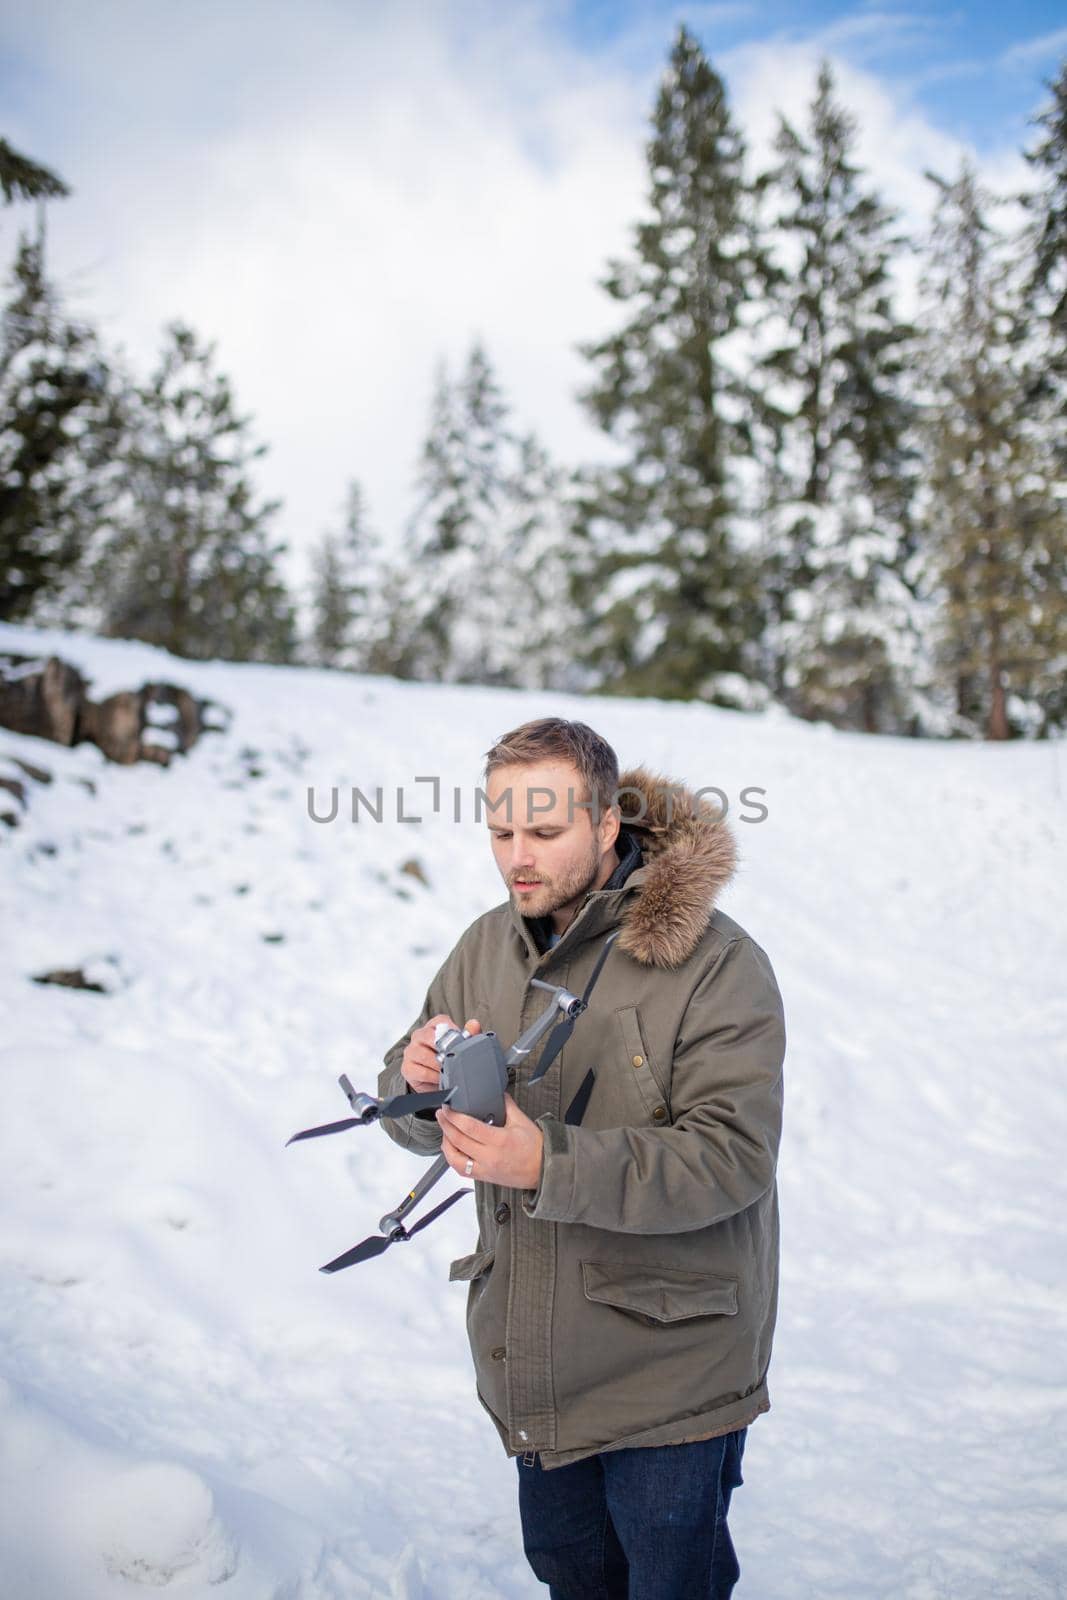 Handsome man holding drone with snowy pines as background. Portrait of concentrated man interacting with drone in frozen woods. Adventurous winter holiday